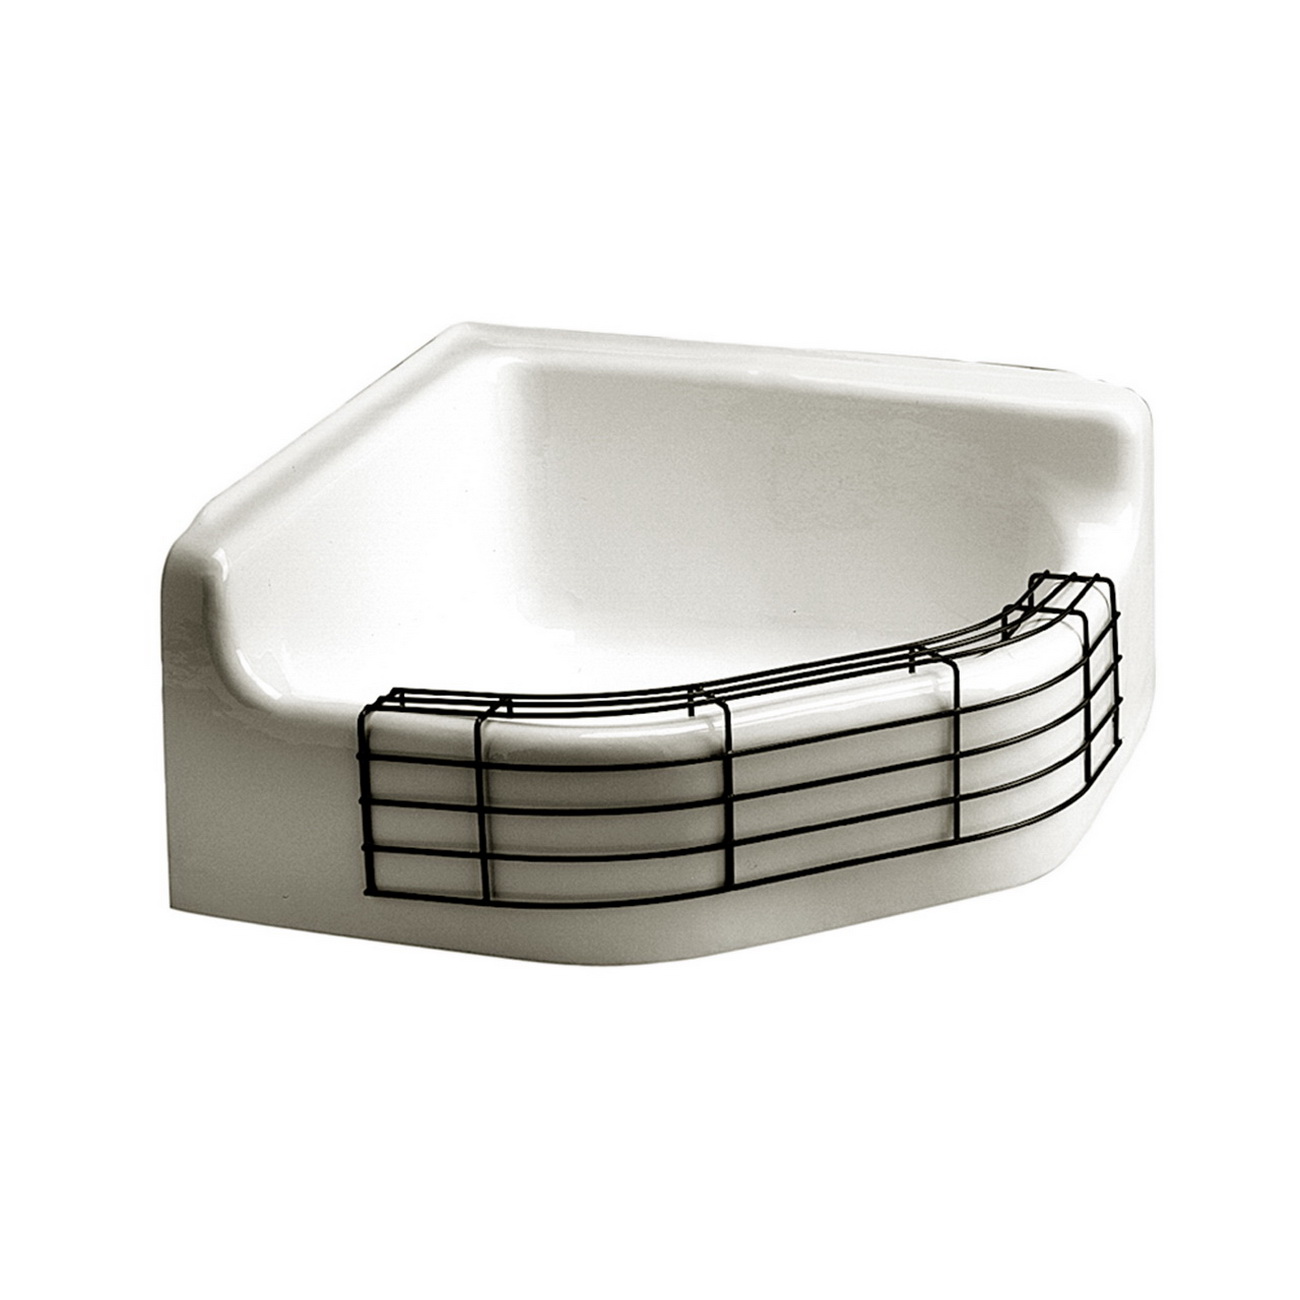 American Standard Florwell™ 7741.000.020 Glossy Porcelain/White Enameled Cast Iron Wall Mount Service Sink, 1-Bowl